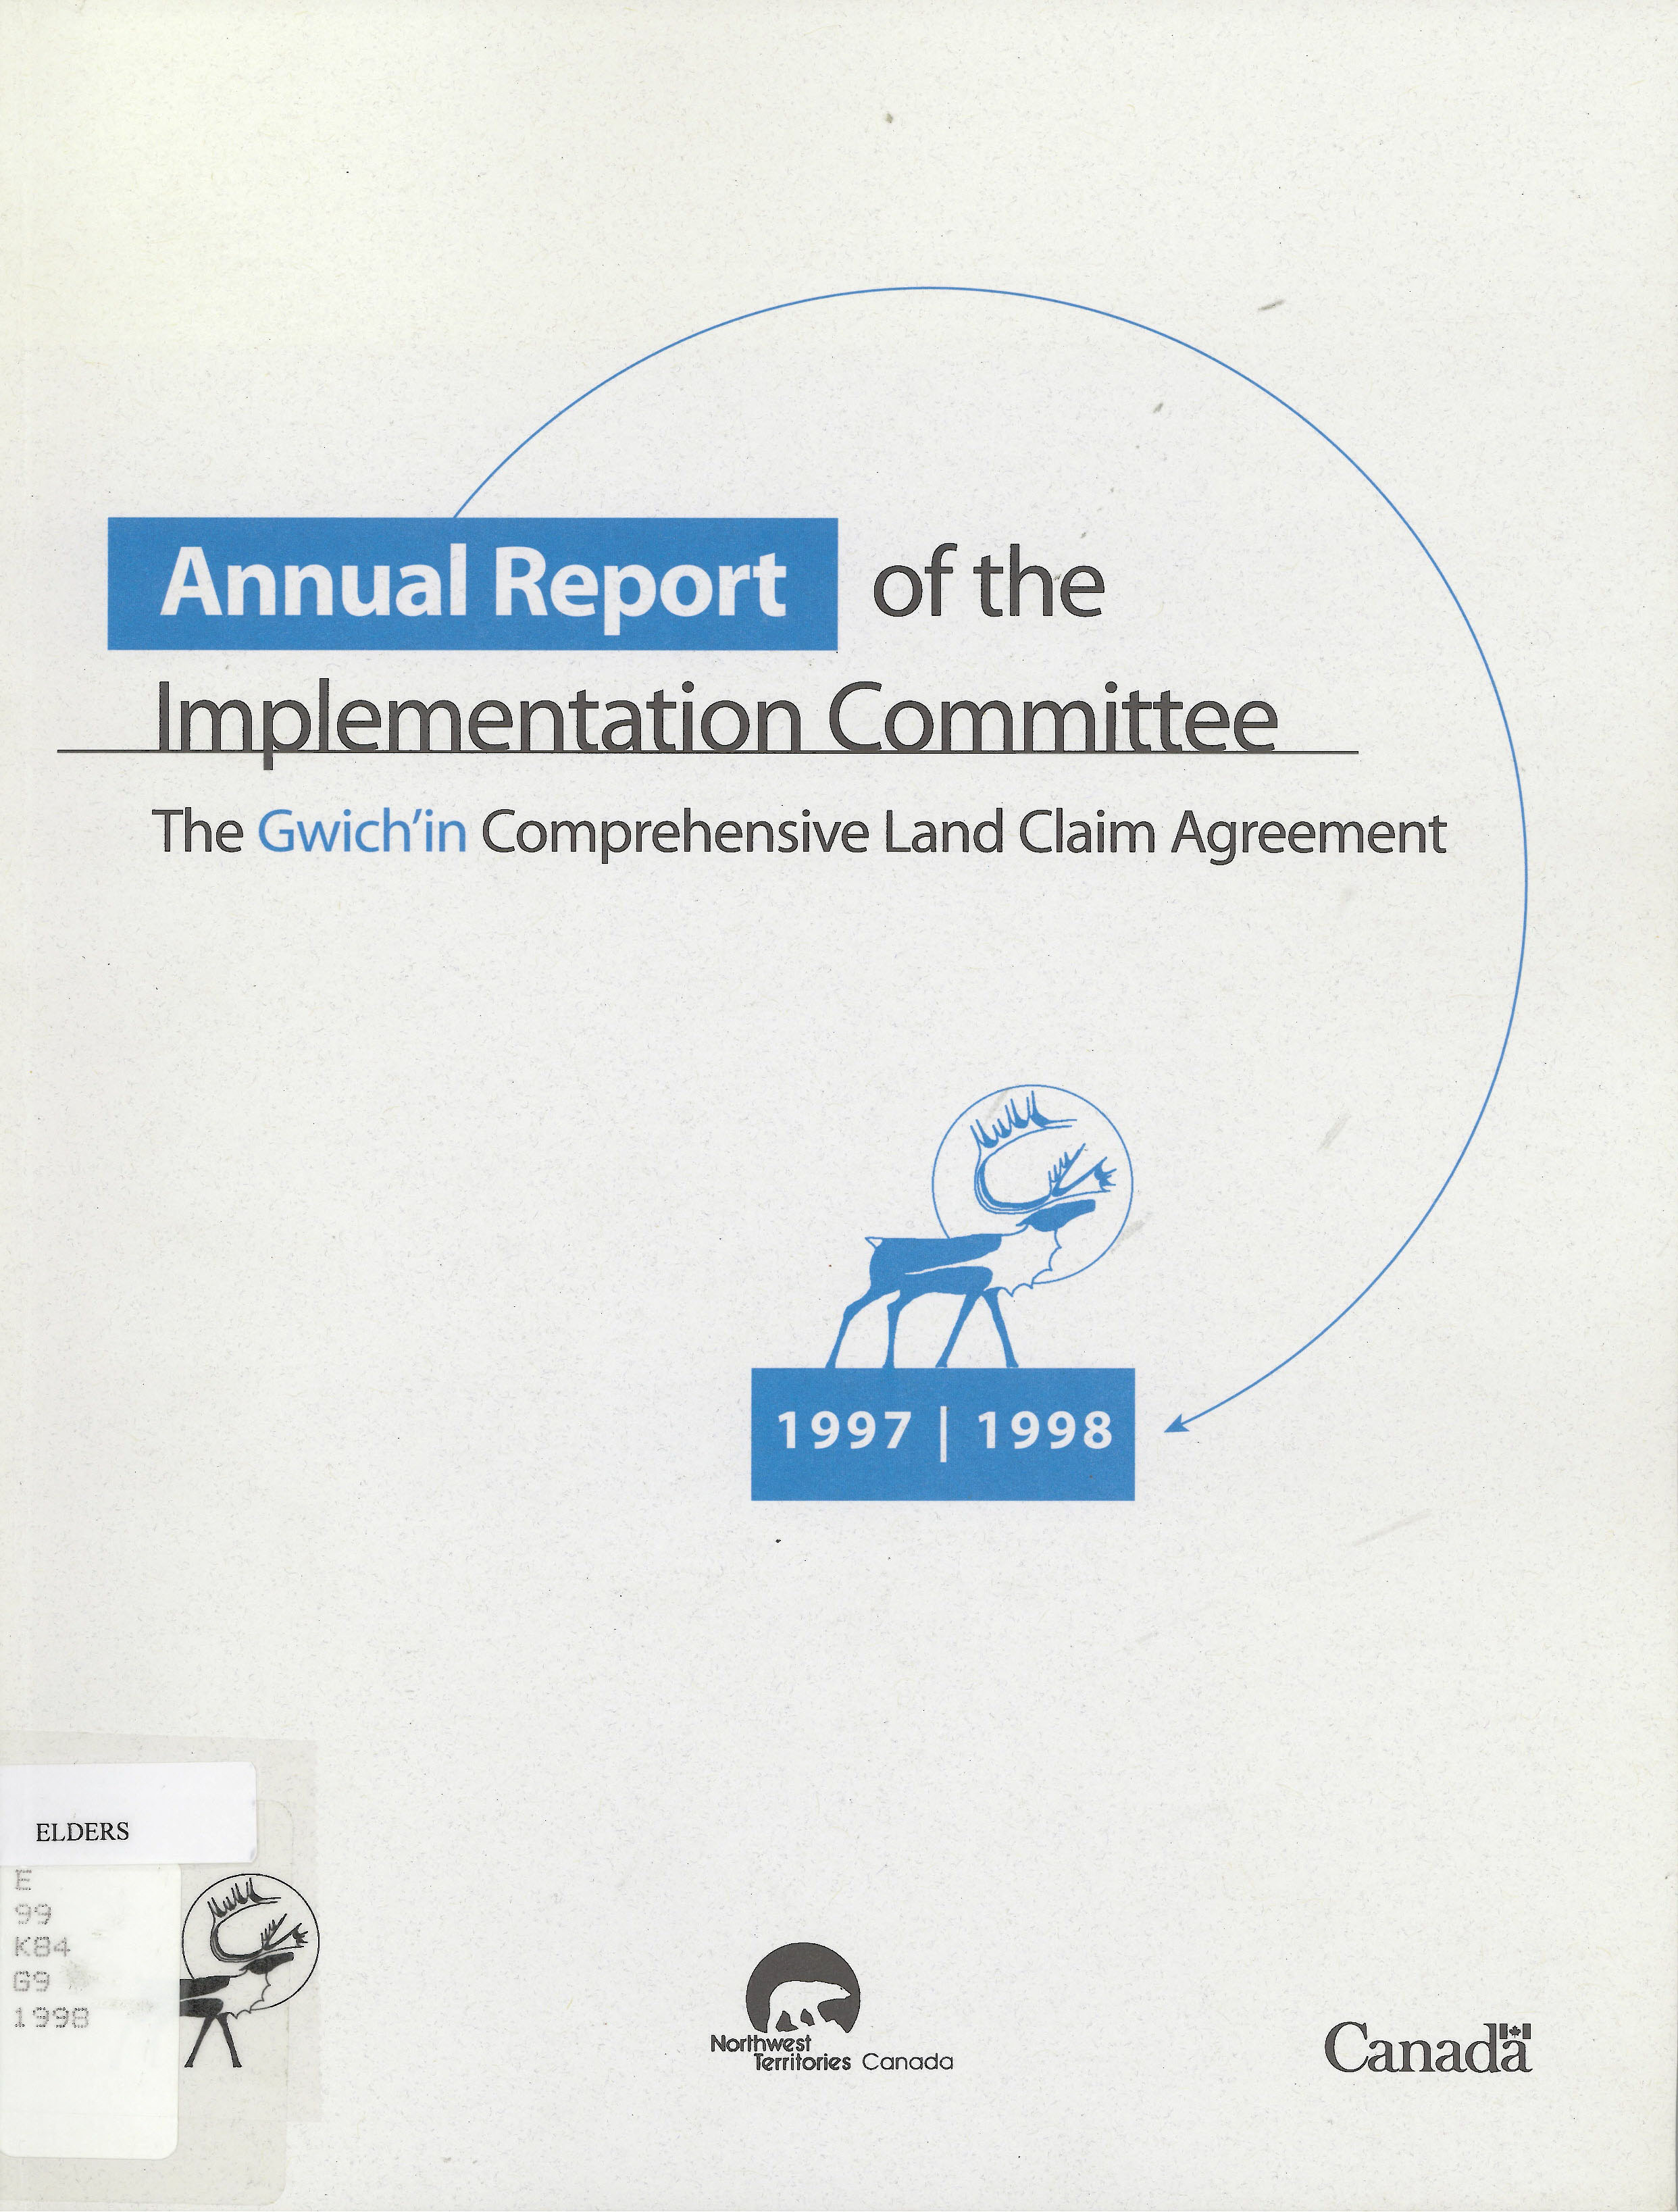 Annual report of the Implementation Committee on the implementation of the Gwich'in Comprehensive Land Claim Agreement.